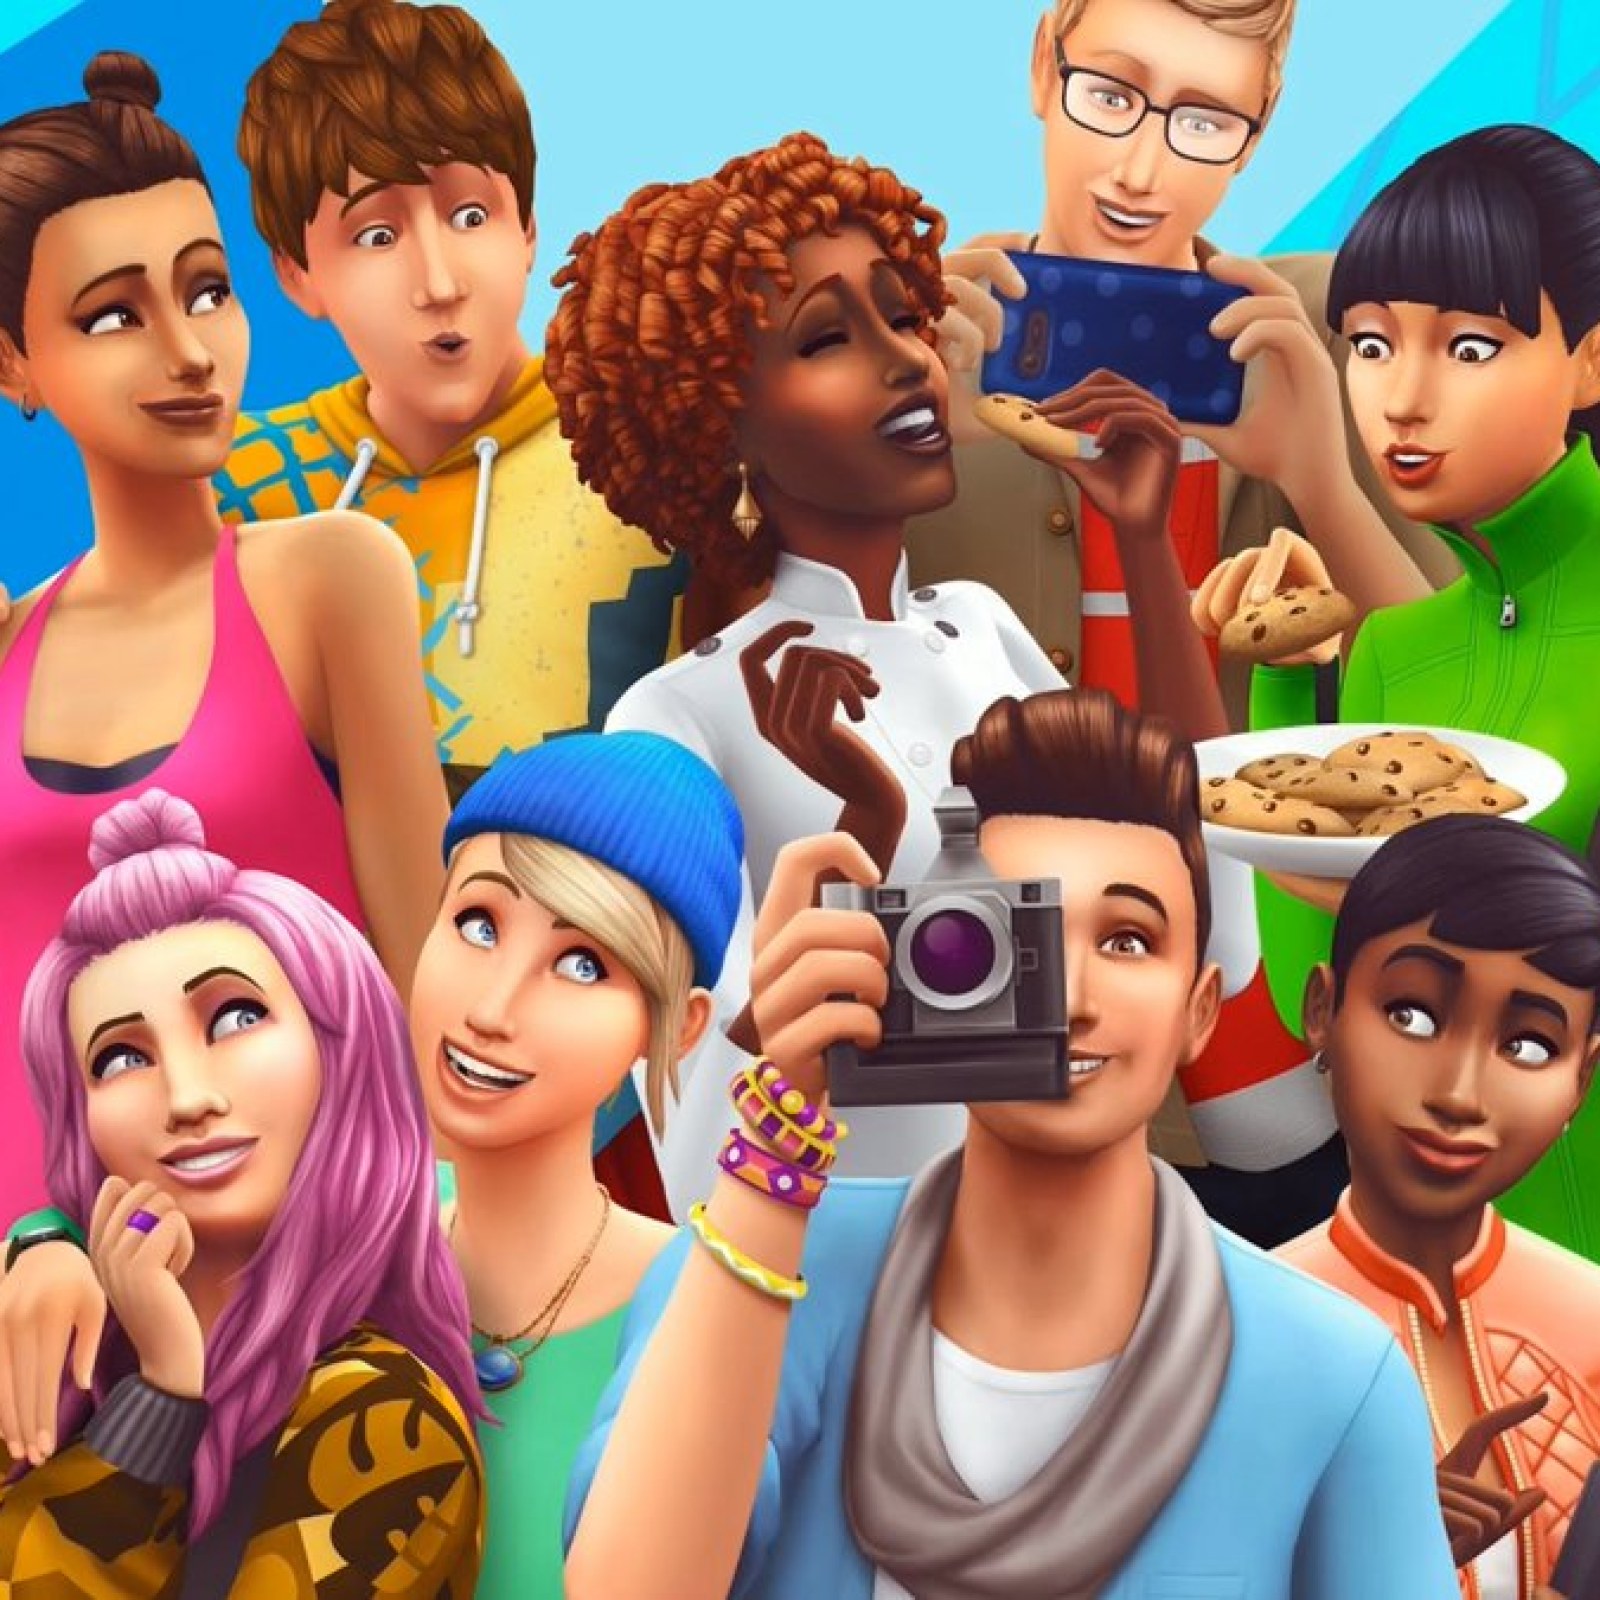 The Sims 4 July 2019 Update Patch Notes Sim Stories Build